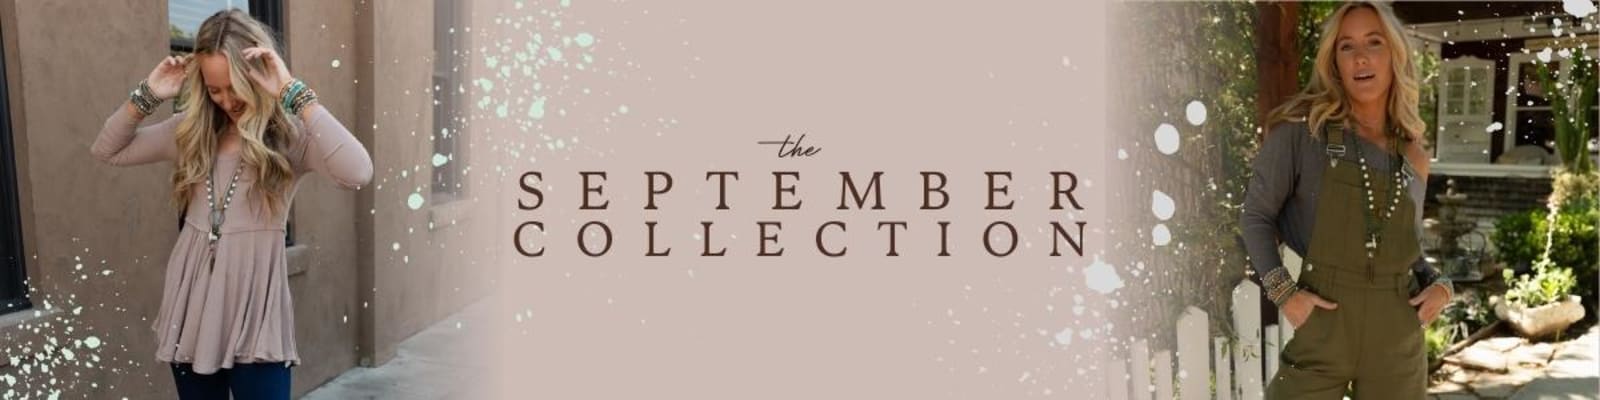 the september collection